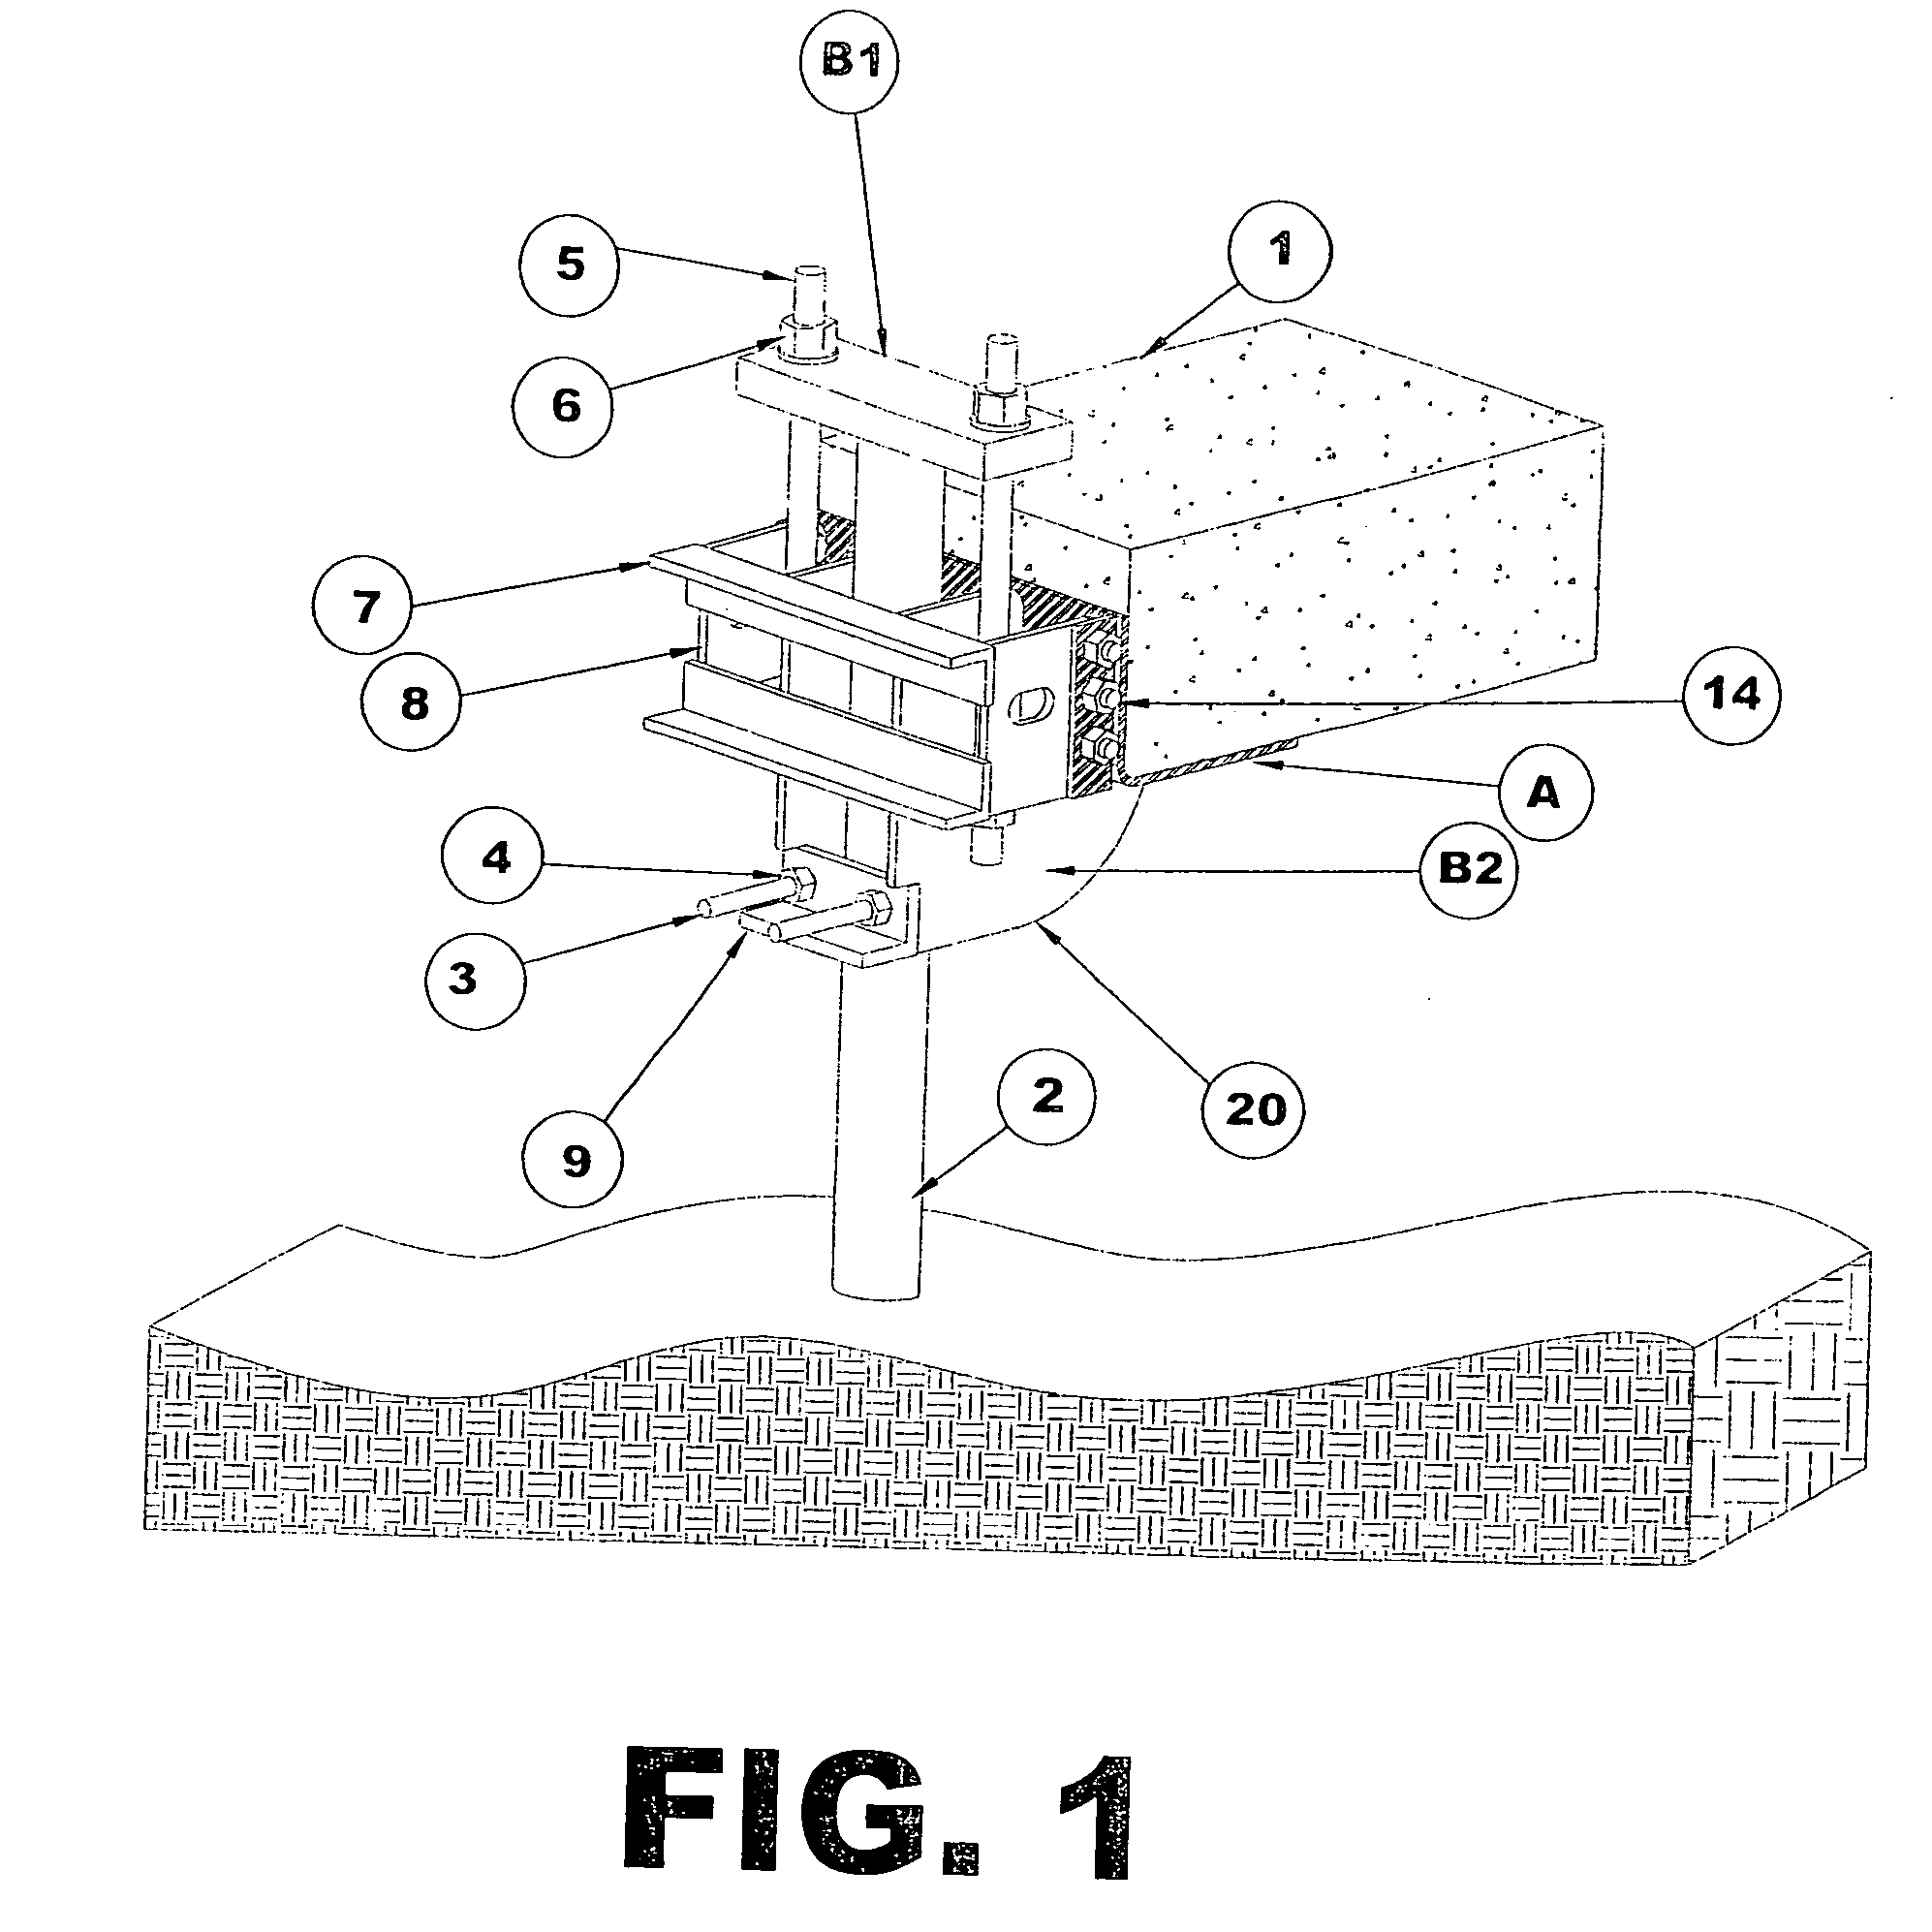 Multiple piece bracket assembly for lifting and supporting a structure